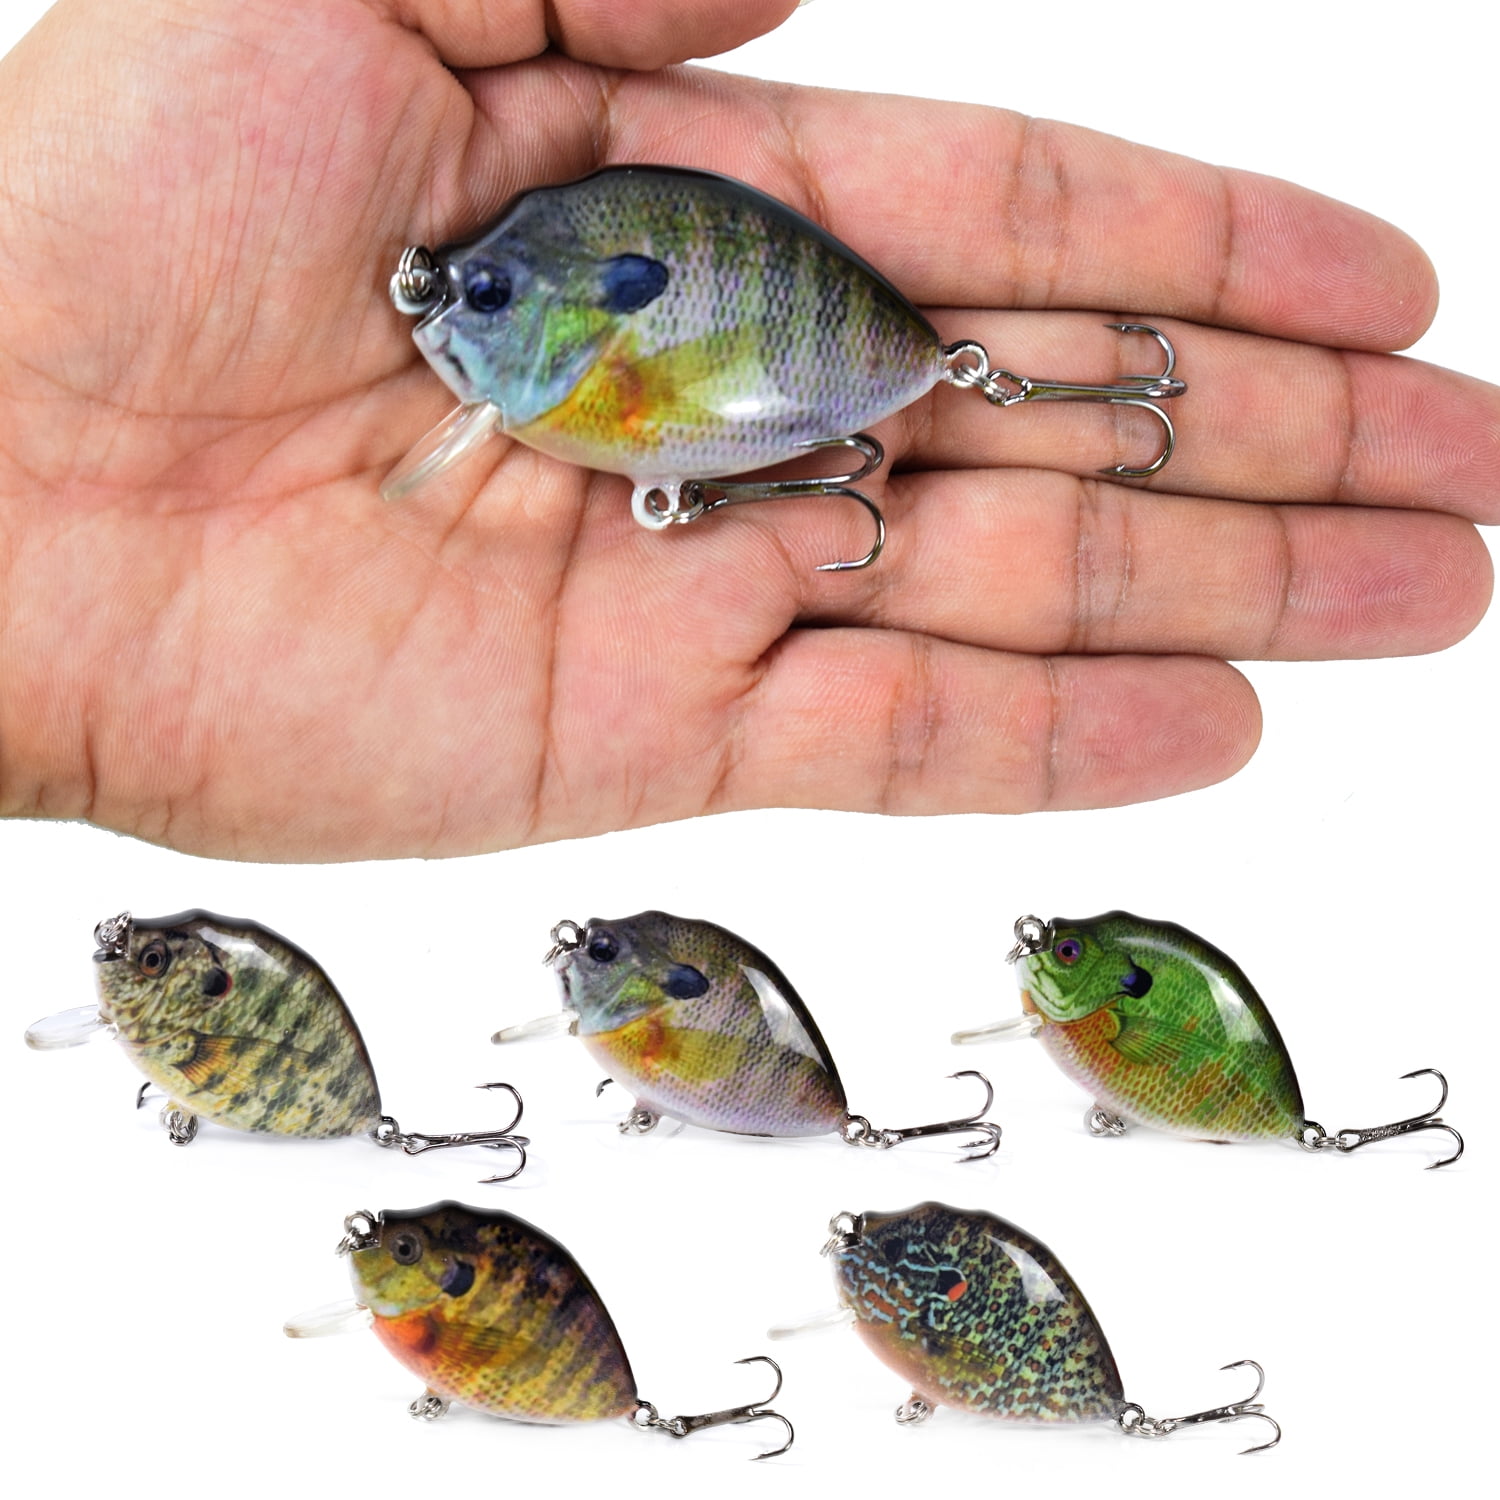 Jointed Shallow Square Bill Jerk baits Lipless Fishing Lures for Bass Sunrise Angler Hard baits Deep Diver Trout Freshwater and Saltwater Crankbaits